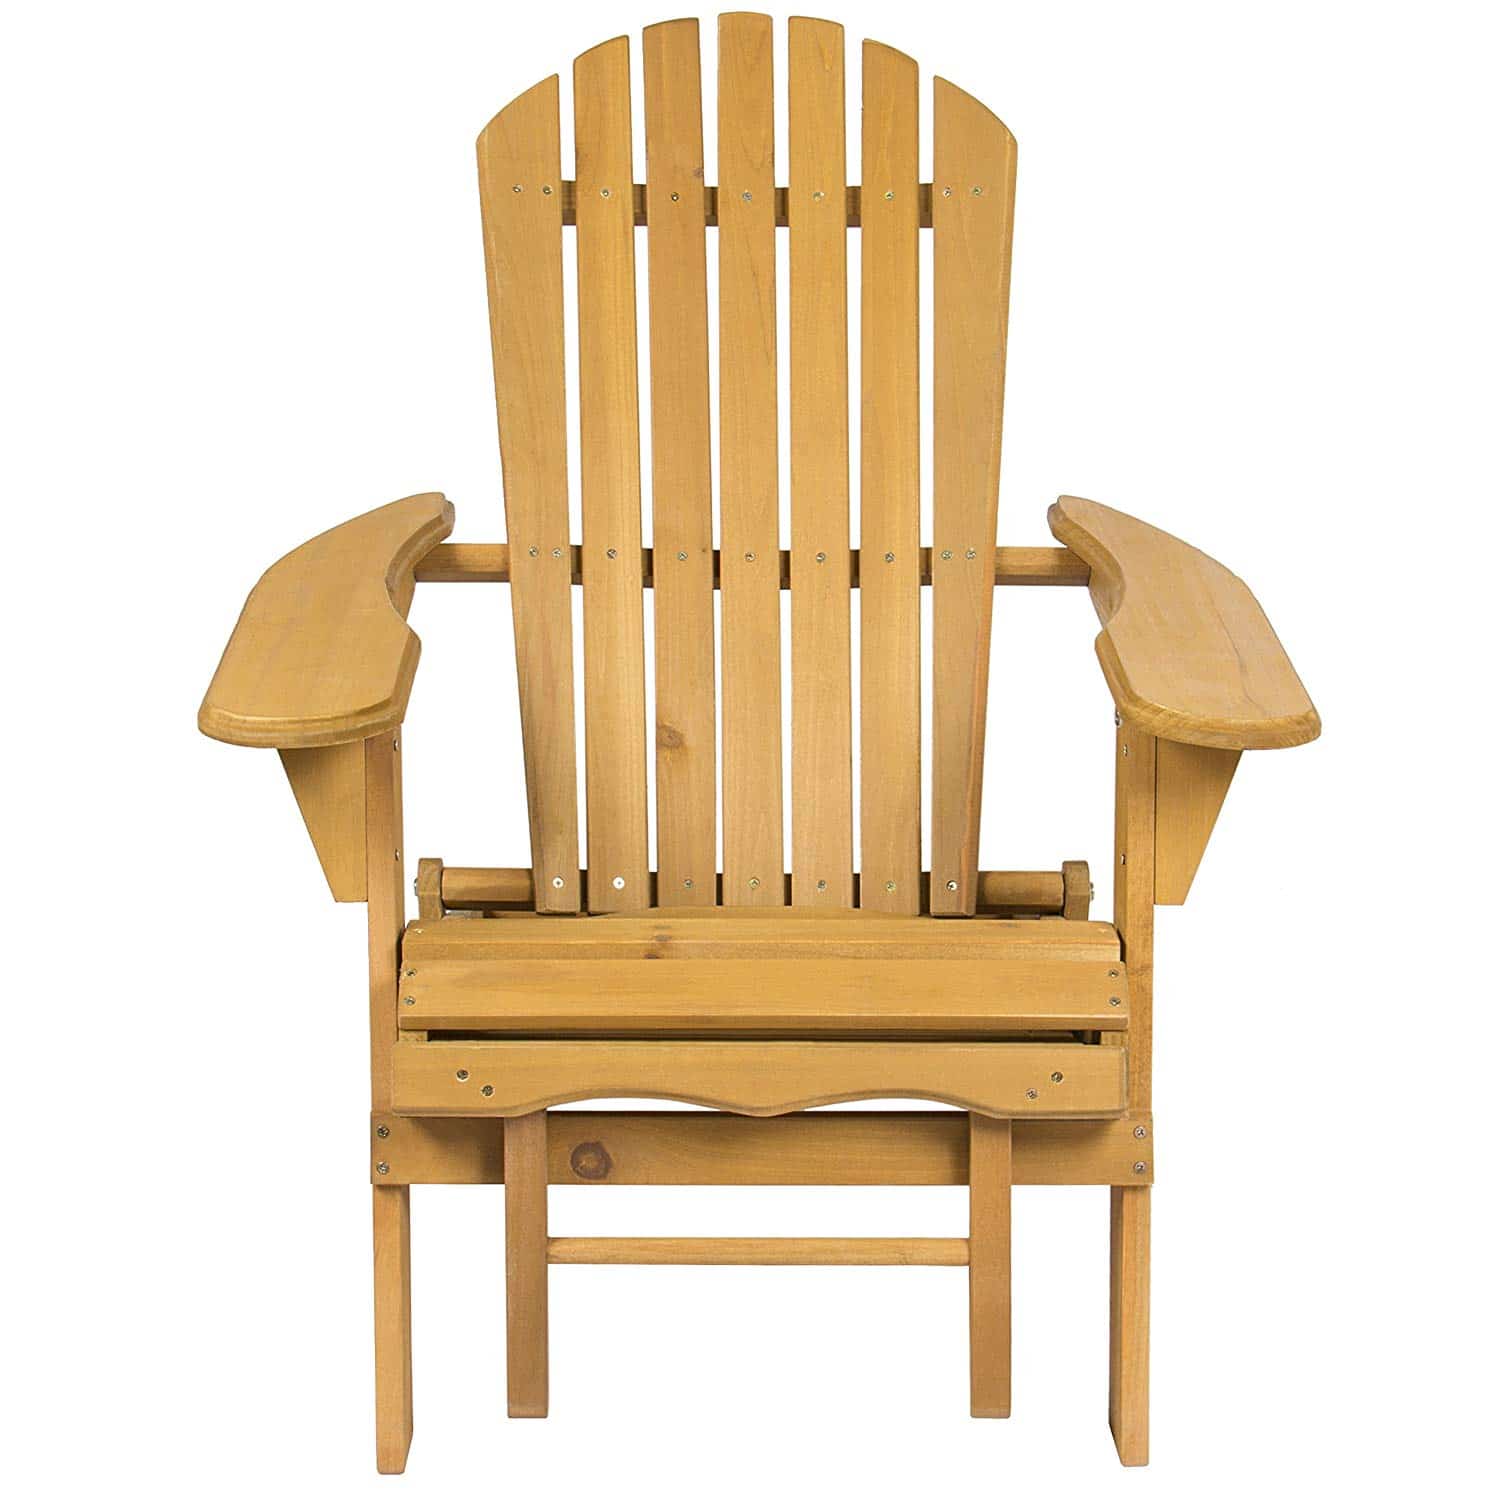 Top 10 Best Adirondack Chair in 2021 Reviews | Buyer's Guide